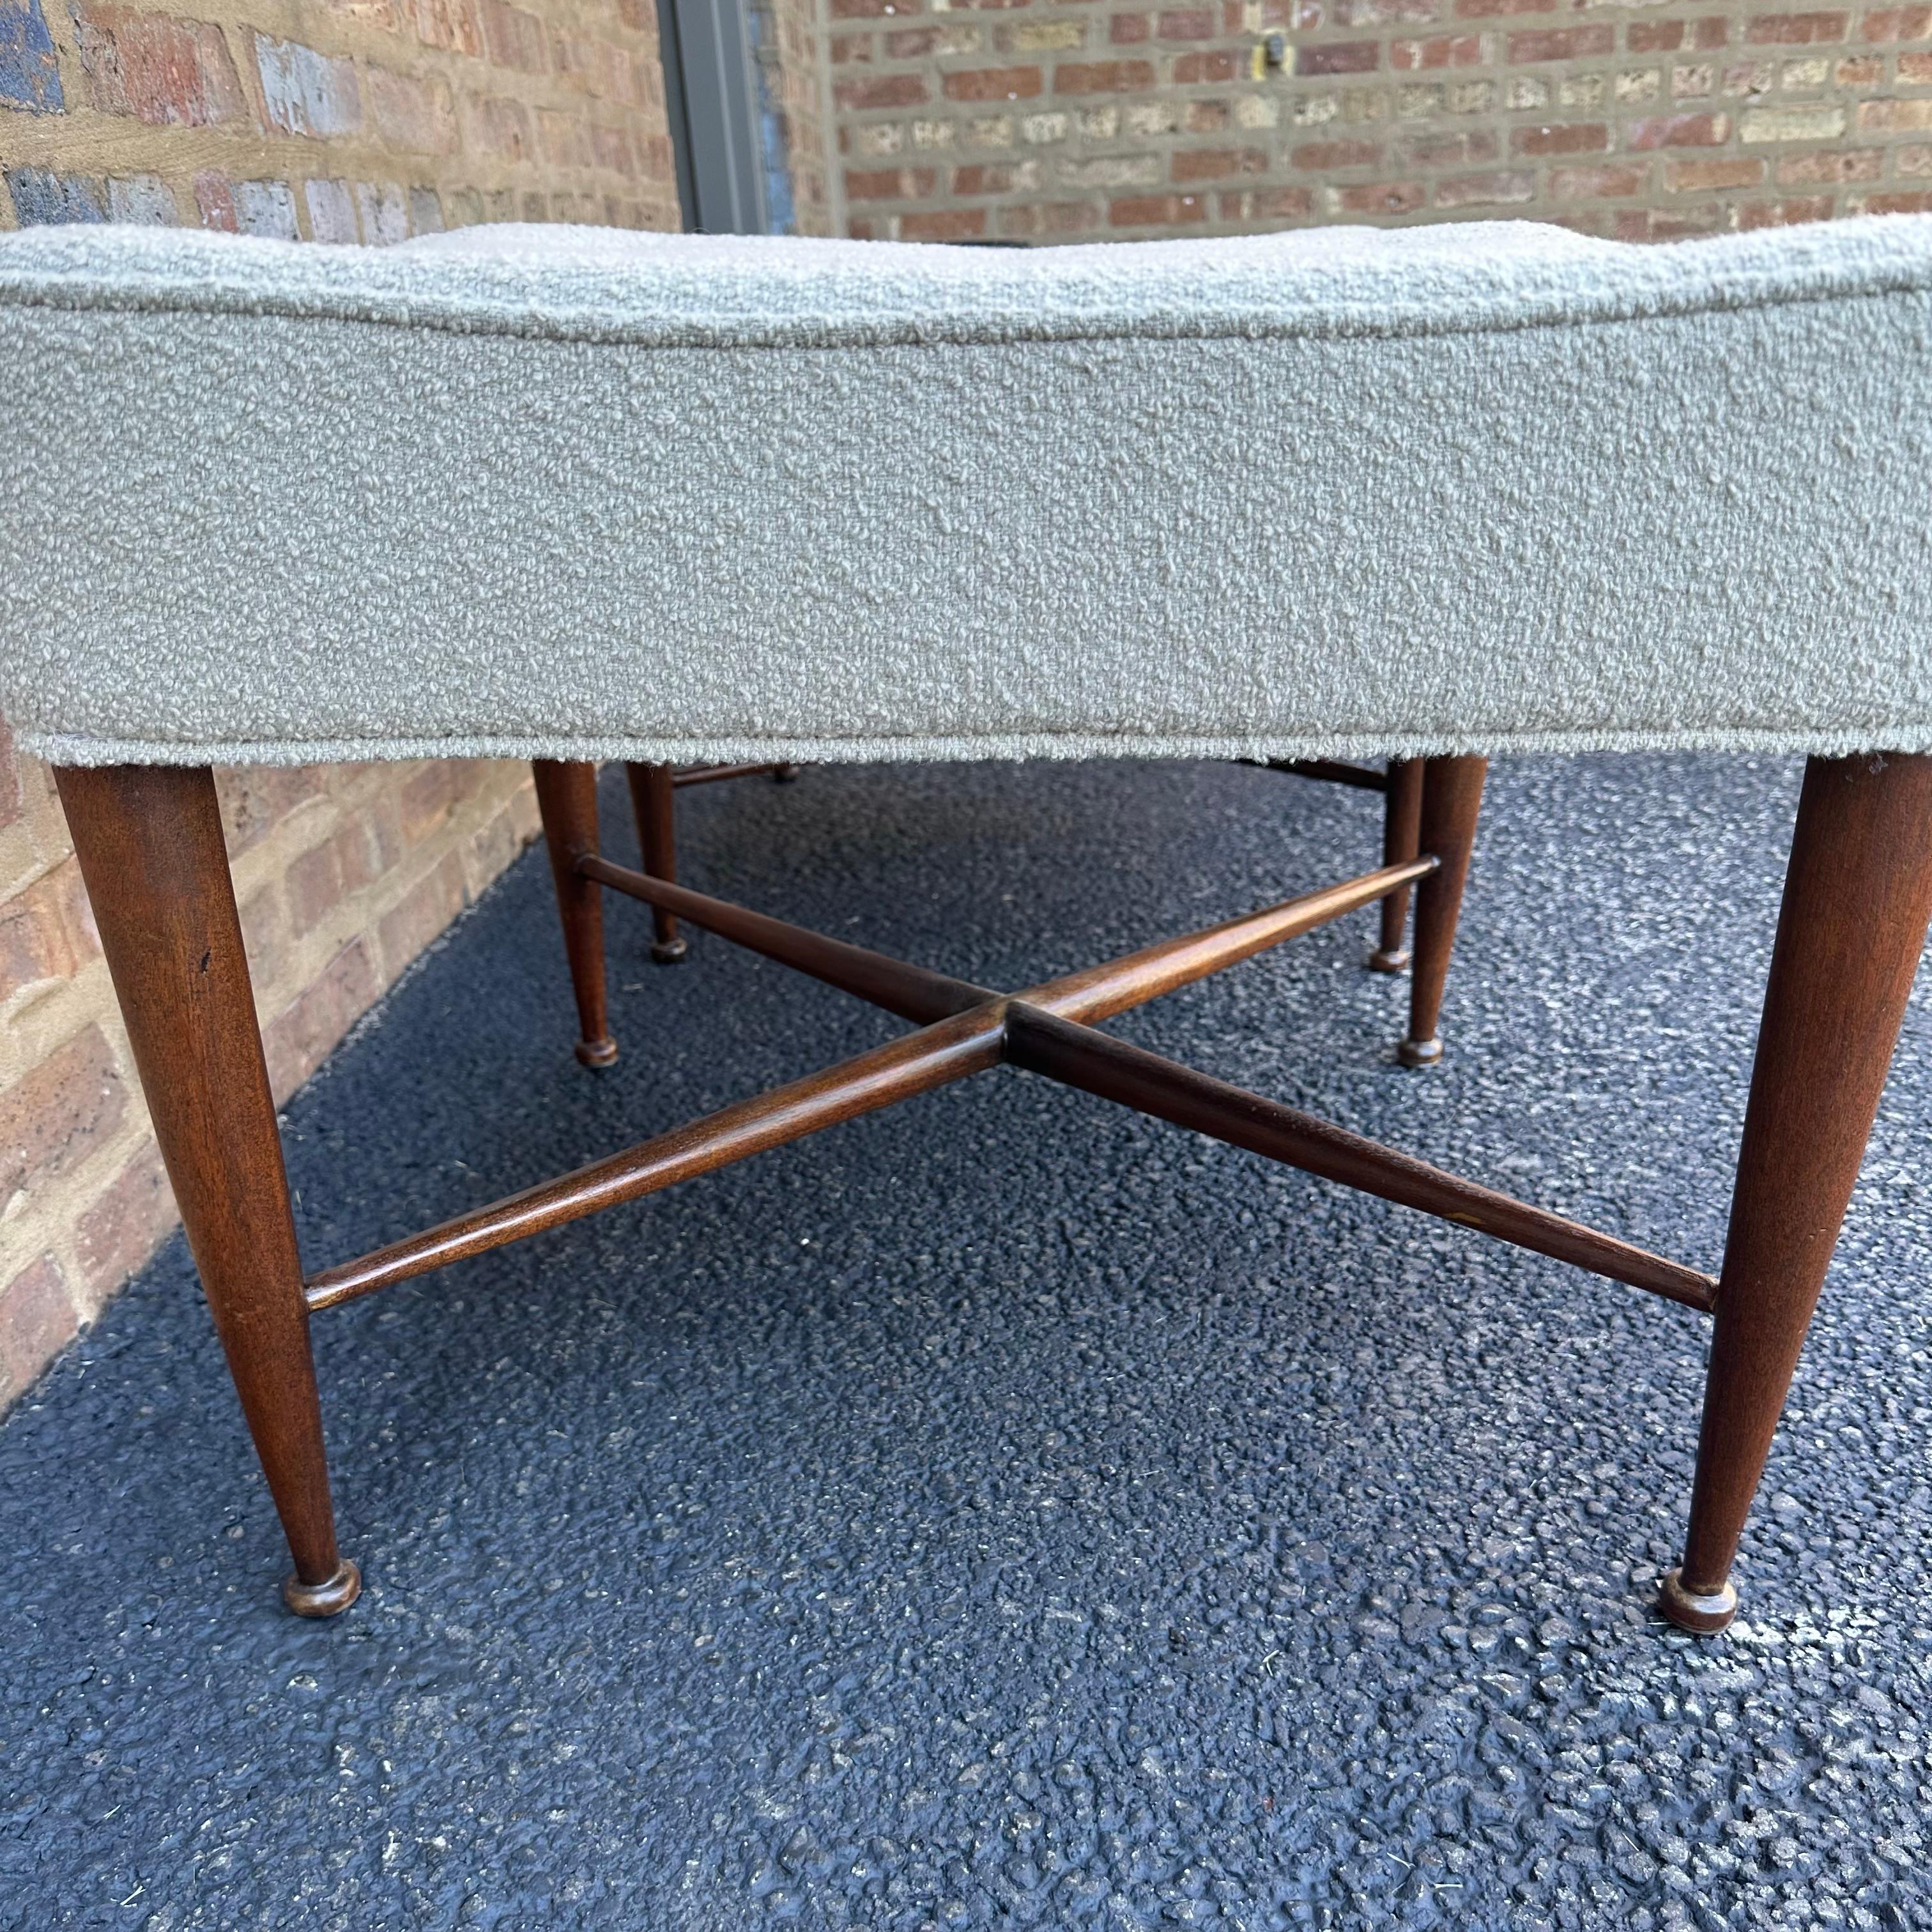 Mid-20th Century Thebes Stools by Edward Wormley for Dunbar For Sale